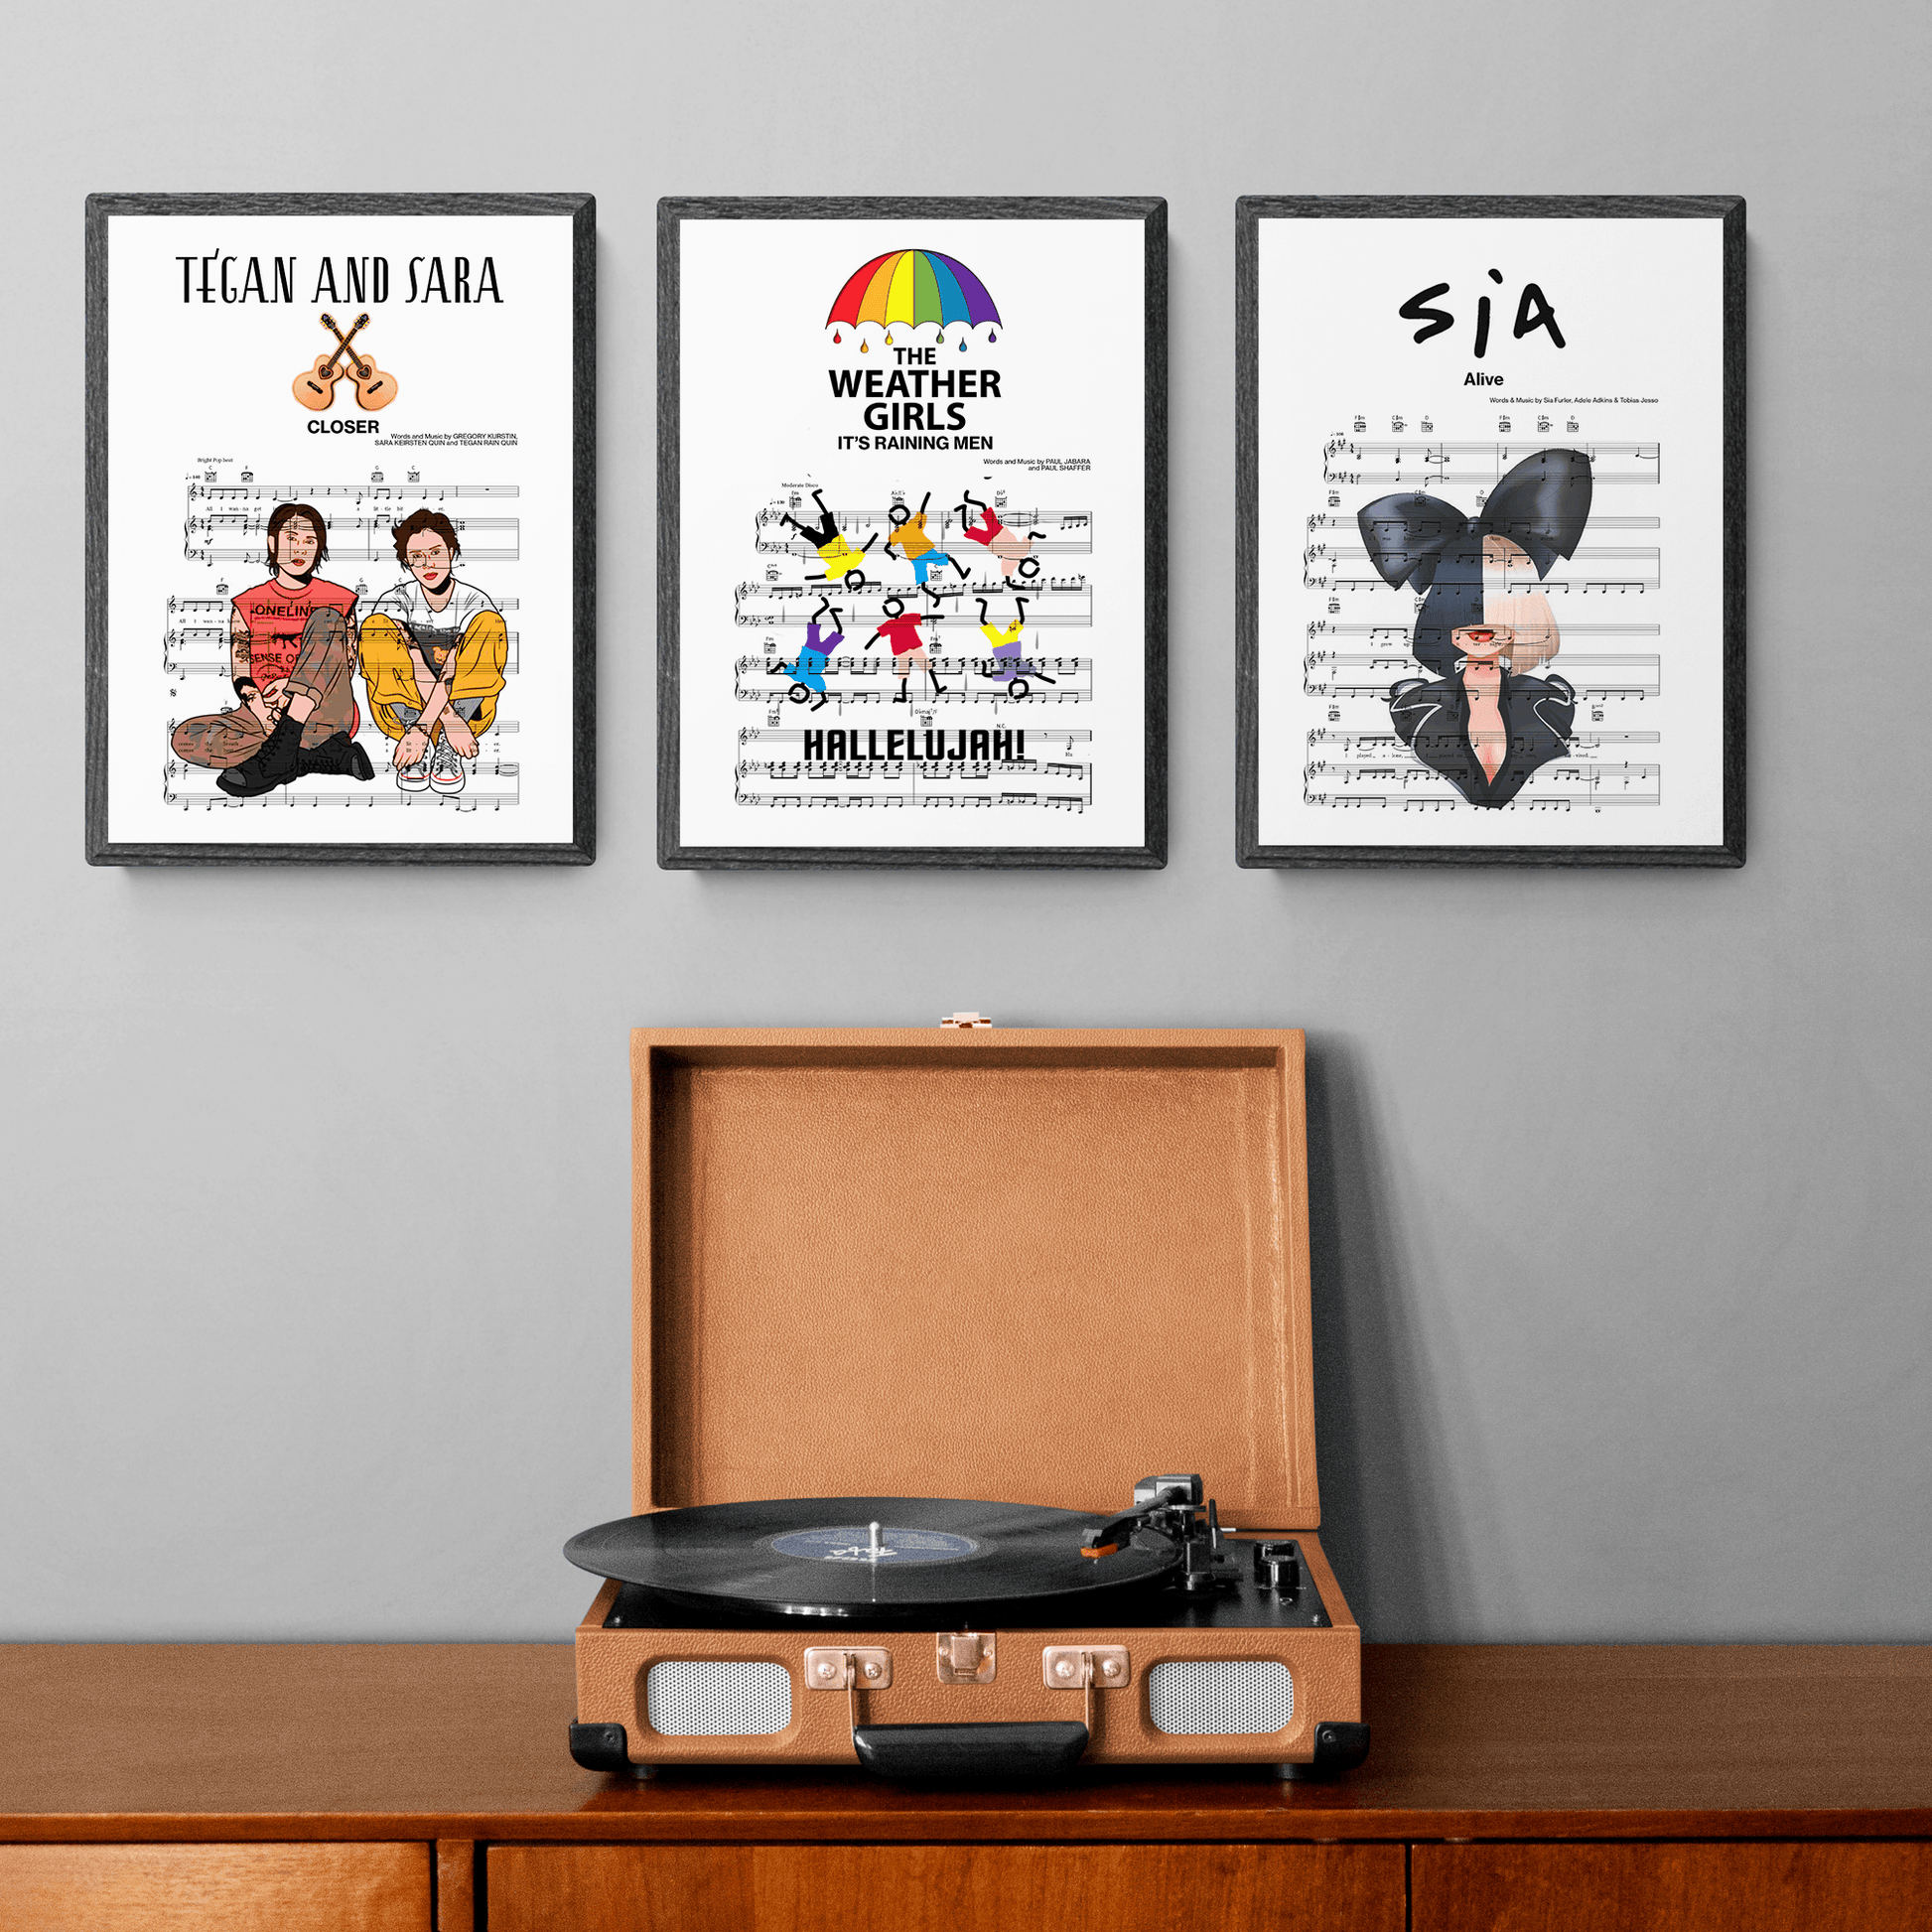 This framed Tegan and Sara - Closer Poster showcases lyrics from their celebrated song with exquisite craftsmanship. An apt decor for a wall or office space, the custom printed art grants an entrancing experience for any music lover.